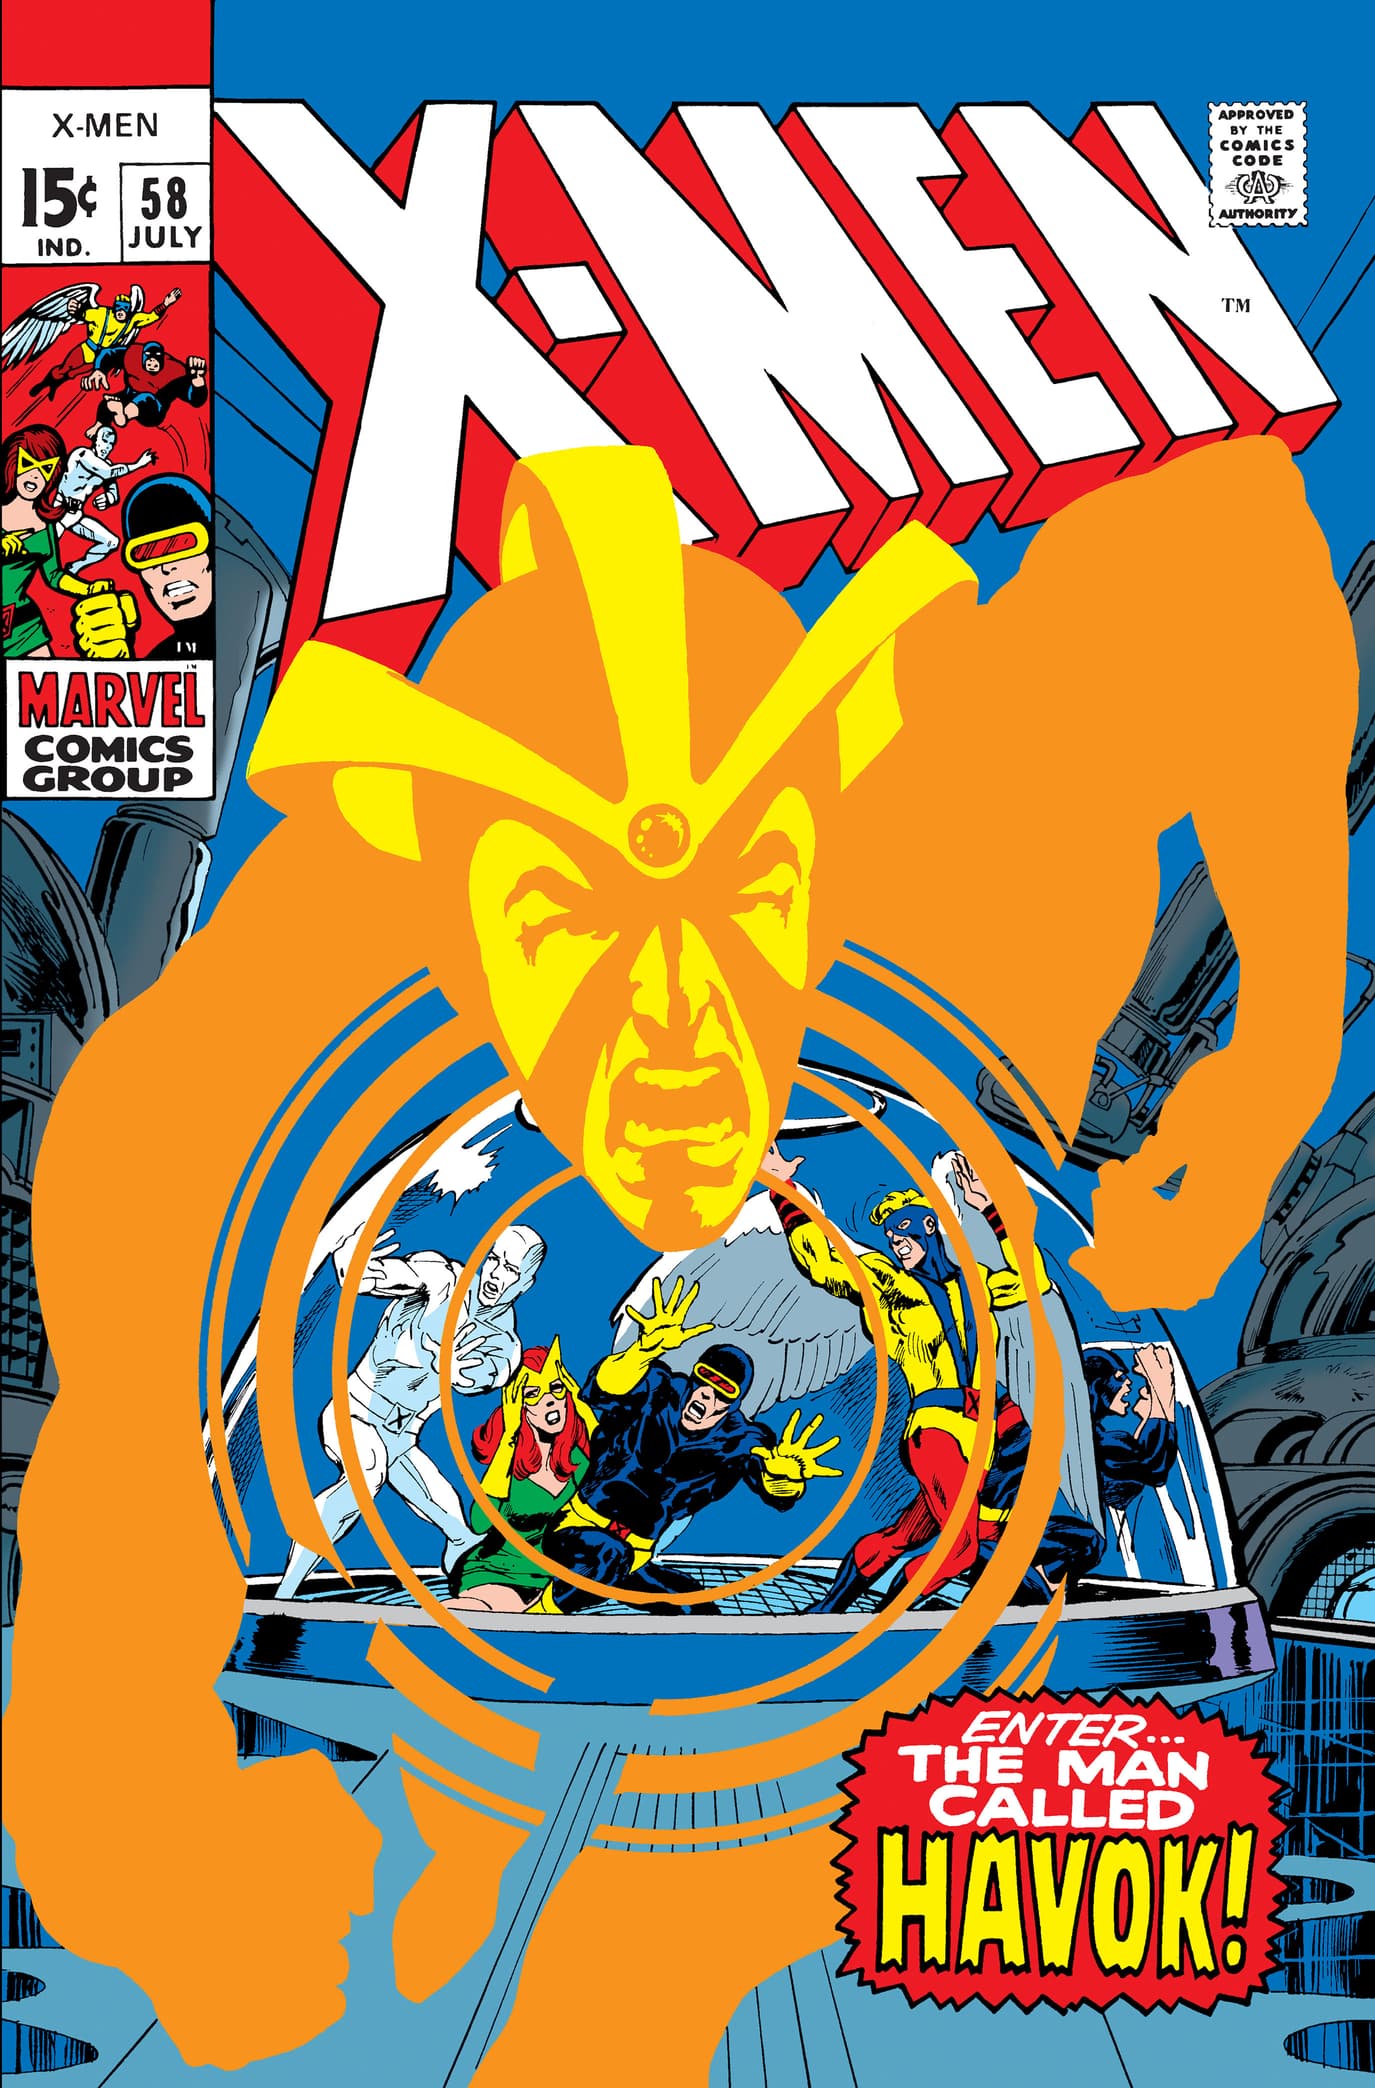 UNCANNY X-MEN #58 cover by Neal Adams